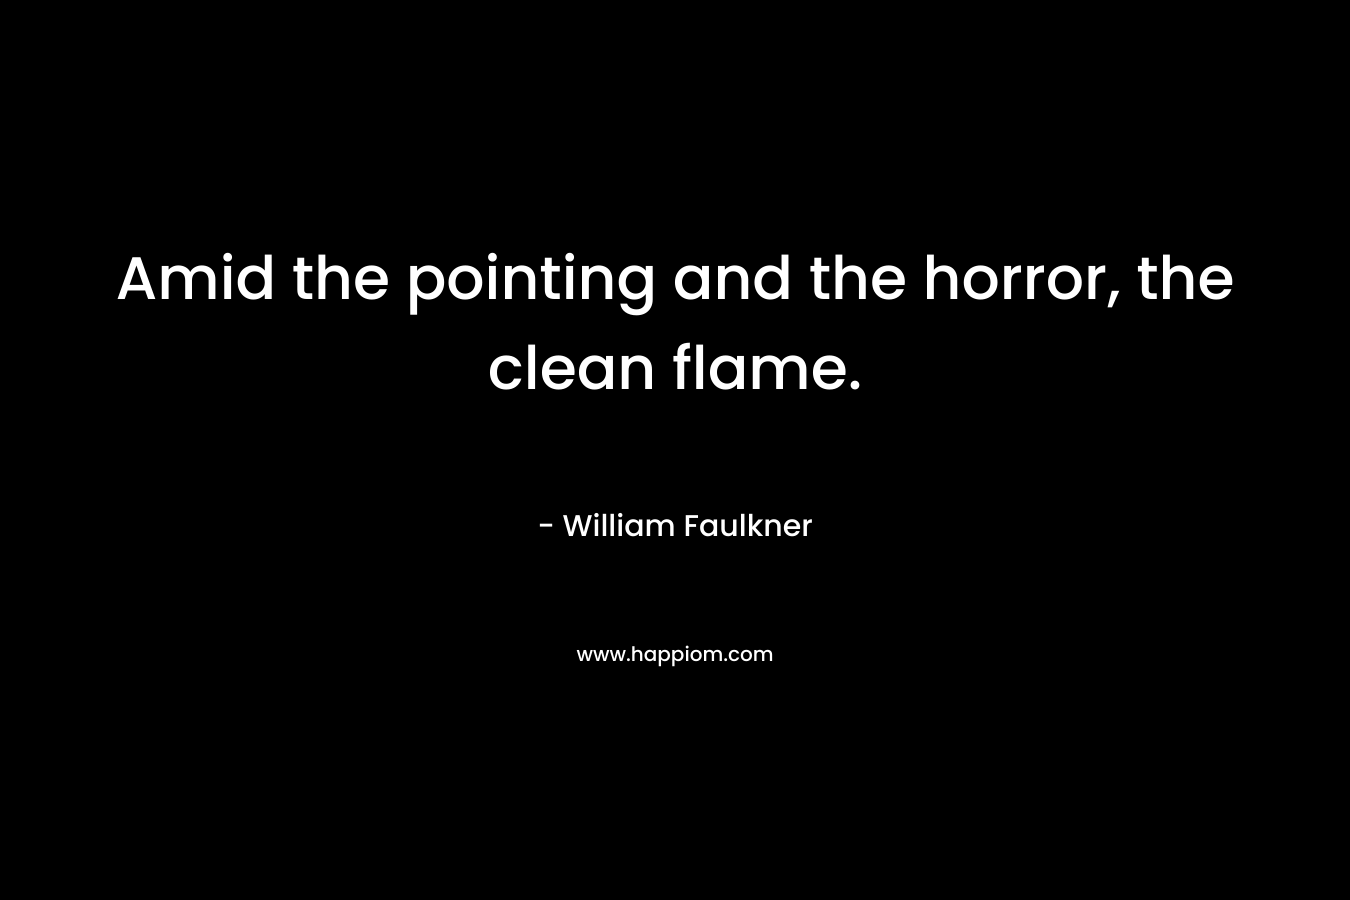 Amid the pointing and the horror, the clean flame. – William Faulkner